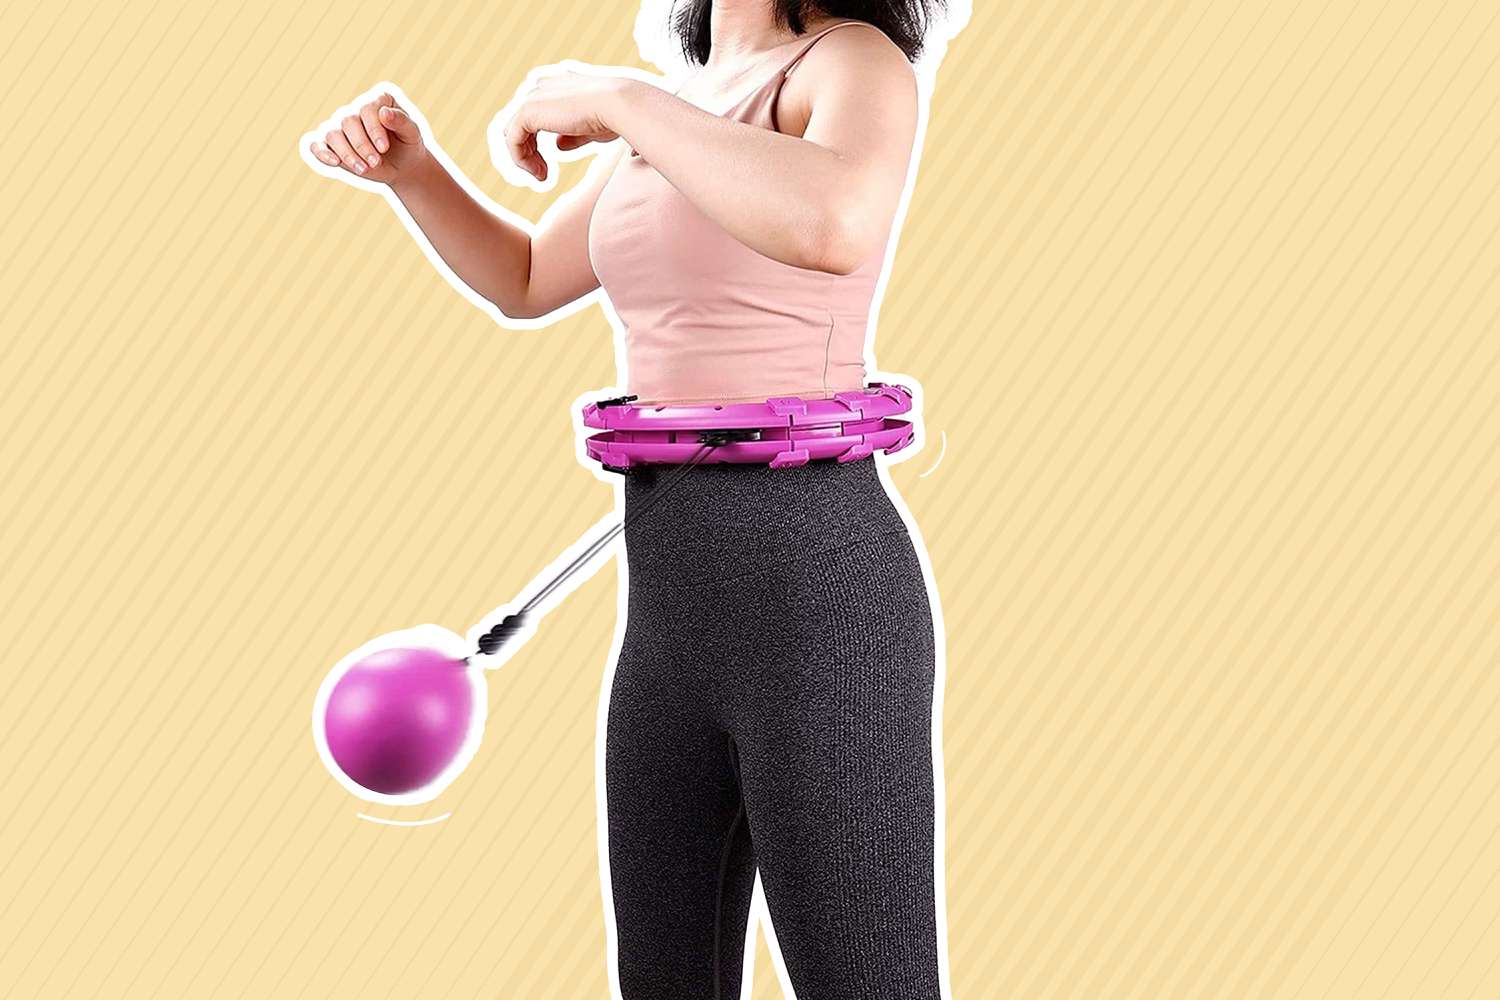 Collage of a woman using a Weighted Hula Hoop on a striped yellow background 